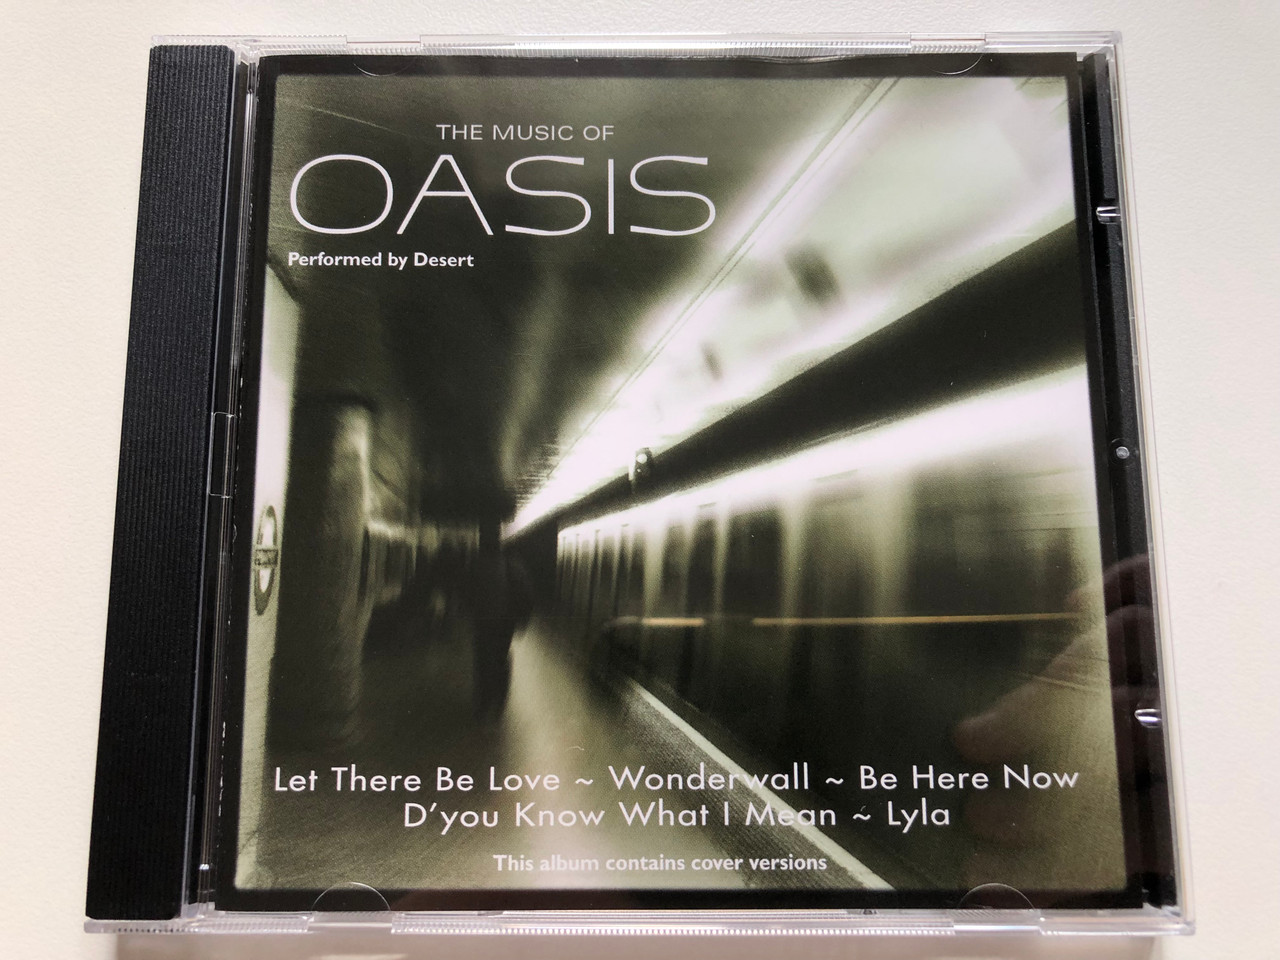 https://cdn10.bigcommerce.com/s-62bdpkt7pb/products/0/images/242719/The_Music_Of_Oasis_-_Performed_By_Desert_Let_There_Be_Love_Wonderwall_Be_Here_Now_Dyou_Know_What_I_Mean_Lyla_Millenium_Gold_Audio_CD_2006_MG2192_1__74988.1658823060.1280.1280.JPG?c=2&_gl=1*1ouqc2y*_ga*MjA2NTIxMjE2MC4xNTkwNTEyNTMy*_ga_WS2VZYPC6G*MTY1ODgxMTM2Mi40OTcuMS4xNjU4ODIyODcyLjM4